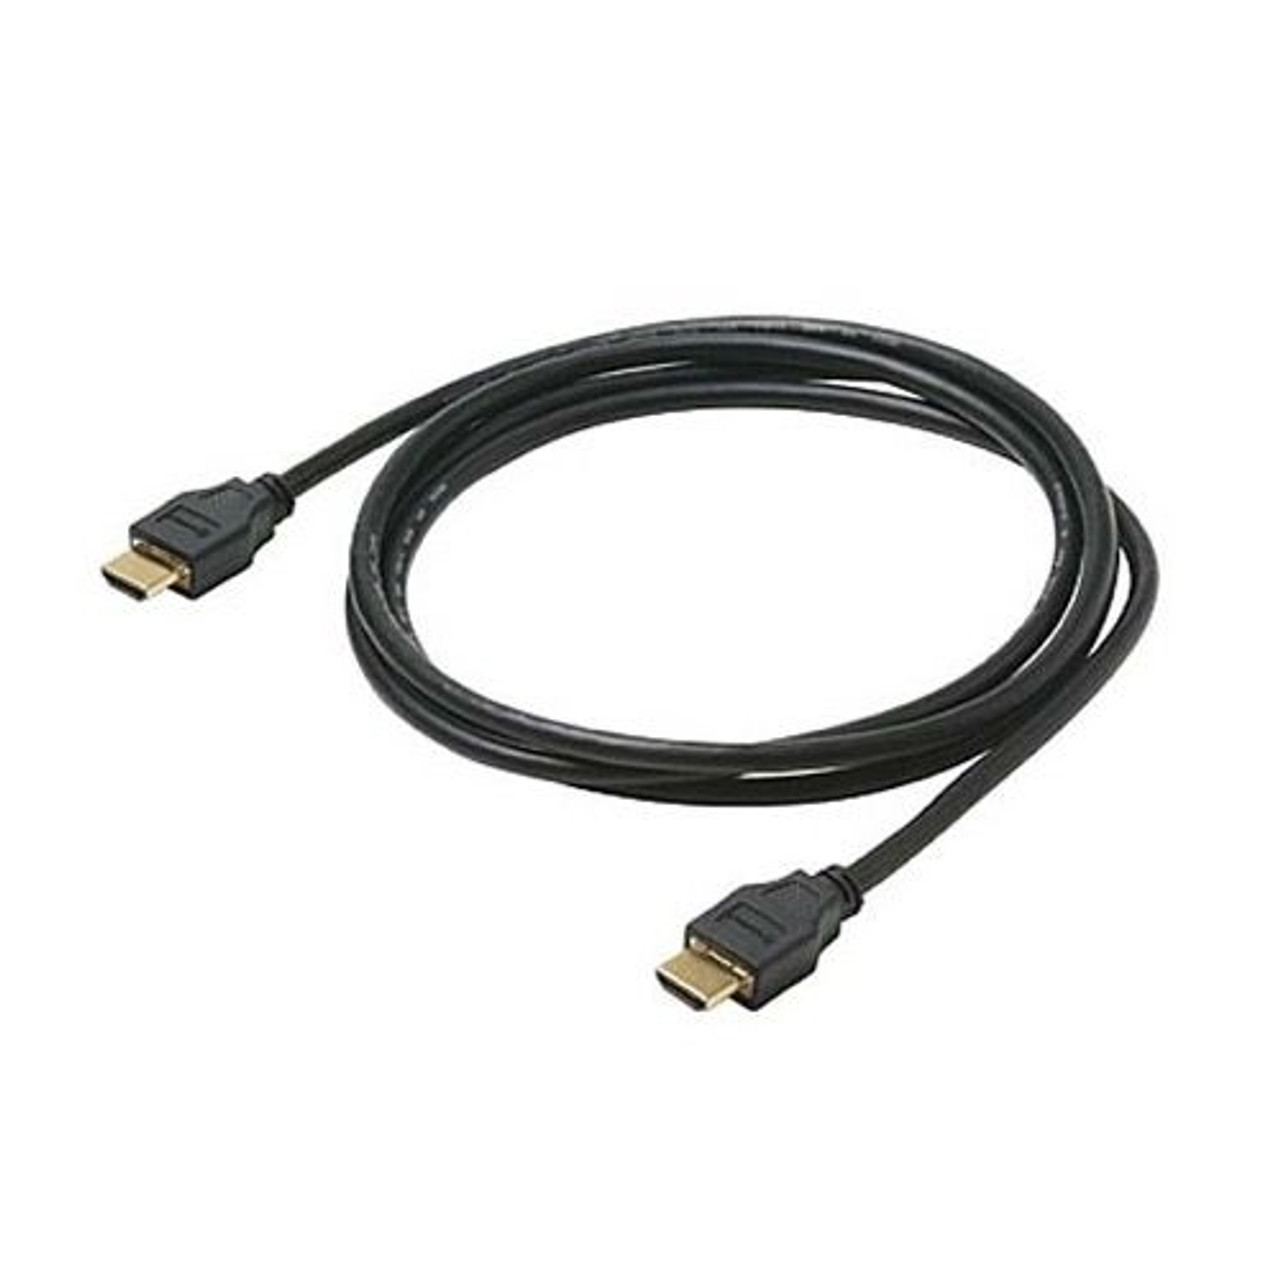 Steren 526-930BK 30' FT HDMI to HDMI Cable High Speed Gold Plate 1.4 Male to Male High Definition Ethernet High Speed 3D Approved 4096x2160 10.2 Gbps HDTV Digital Video Multi-Media Interface Interconnect, Part # 526930-BK